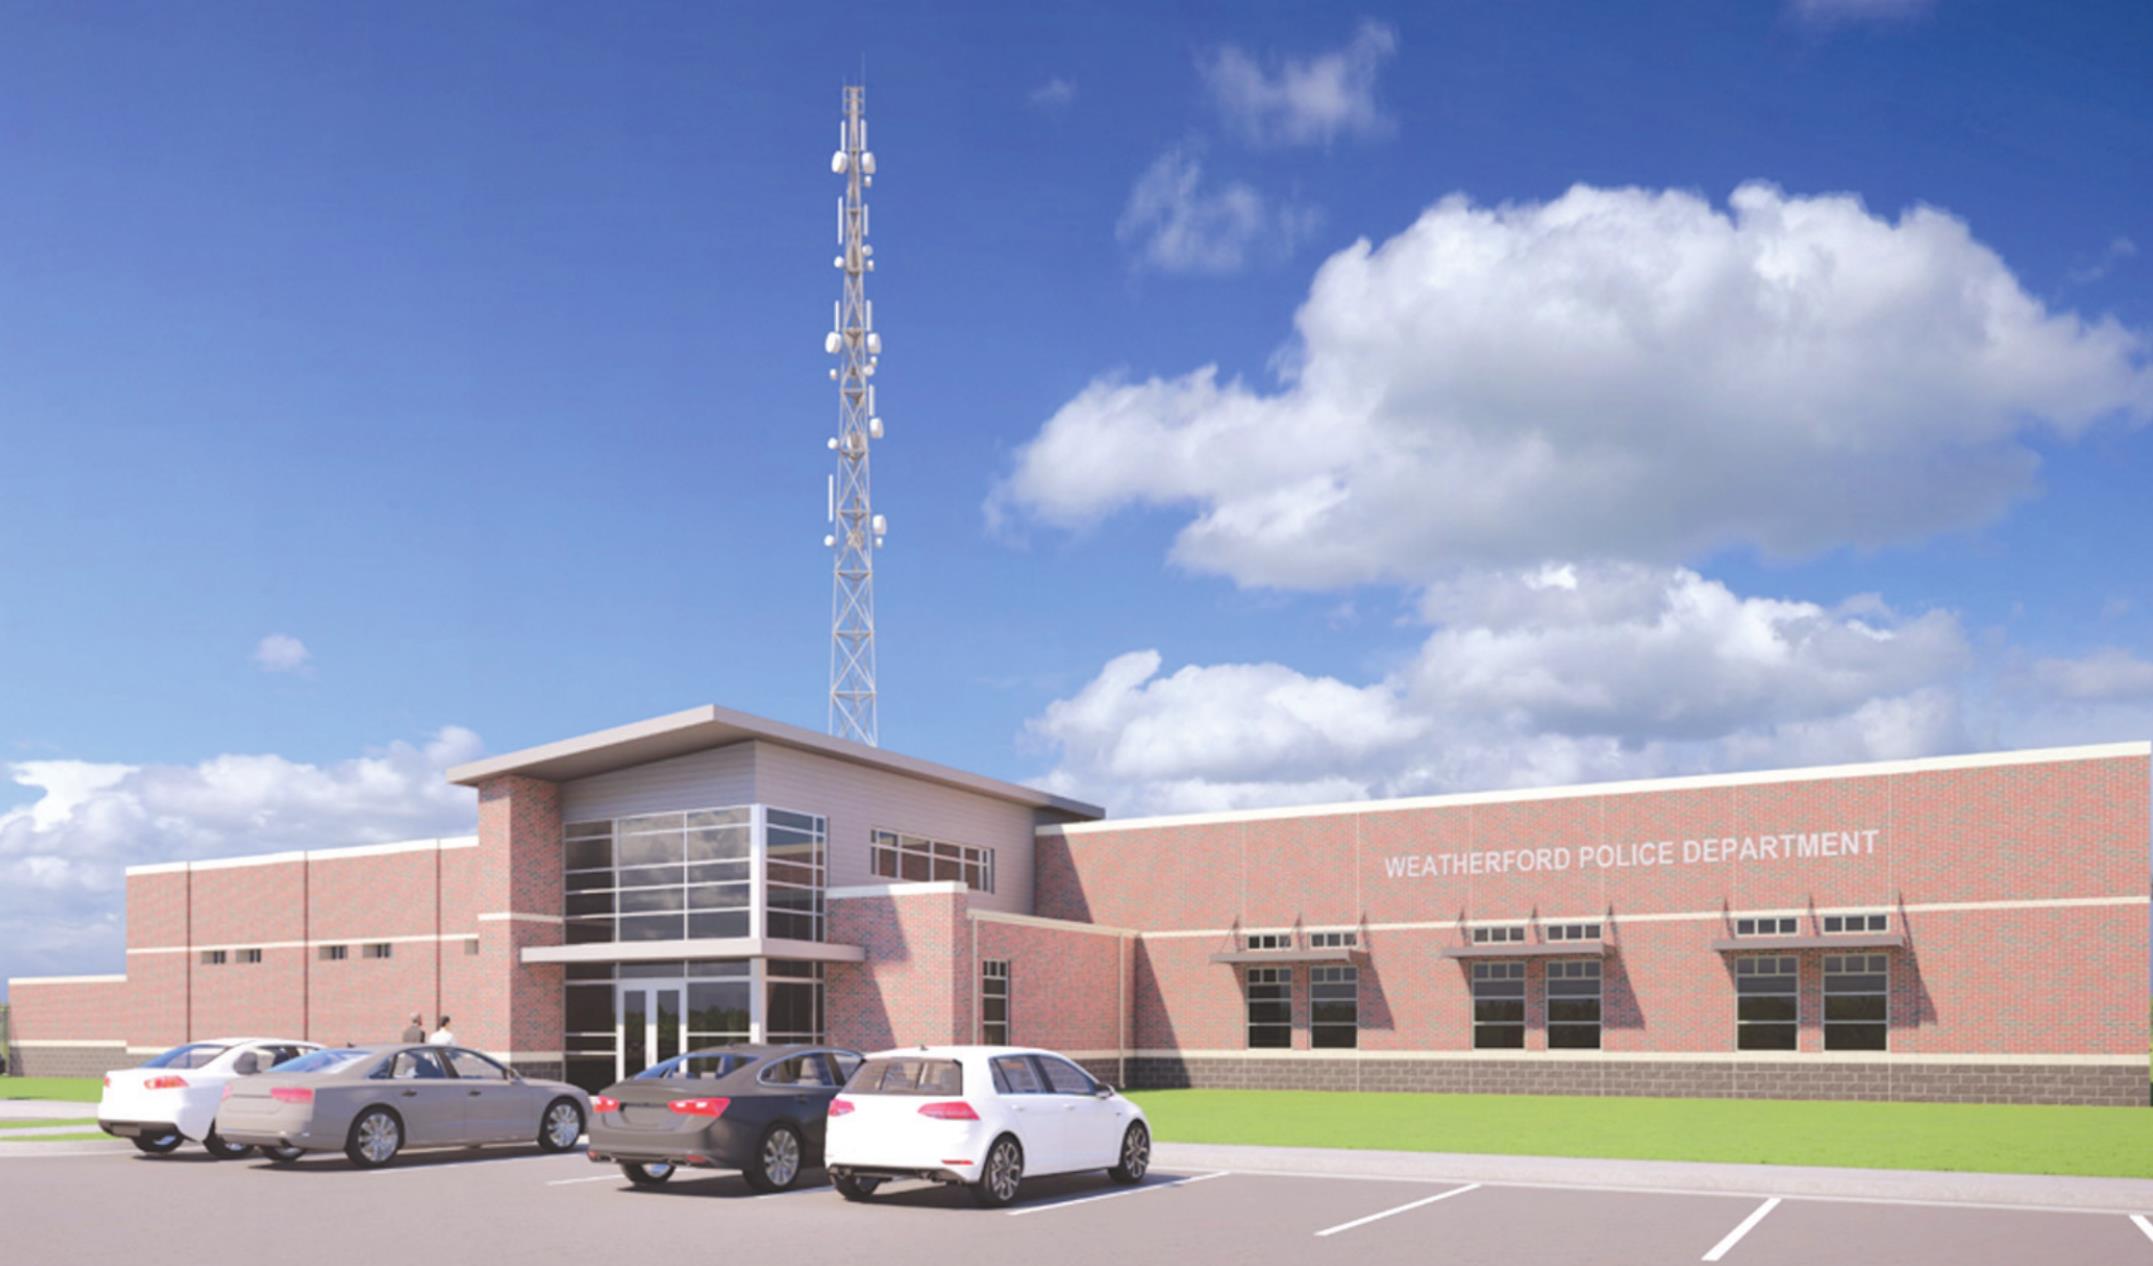 This schematic drawing shows what the new Weatherford Police station may look like once completed at the site of the former Weatherford Regional Hospital. The project was approved by voters in the Yes Weatherford election August 2020. Provided